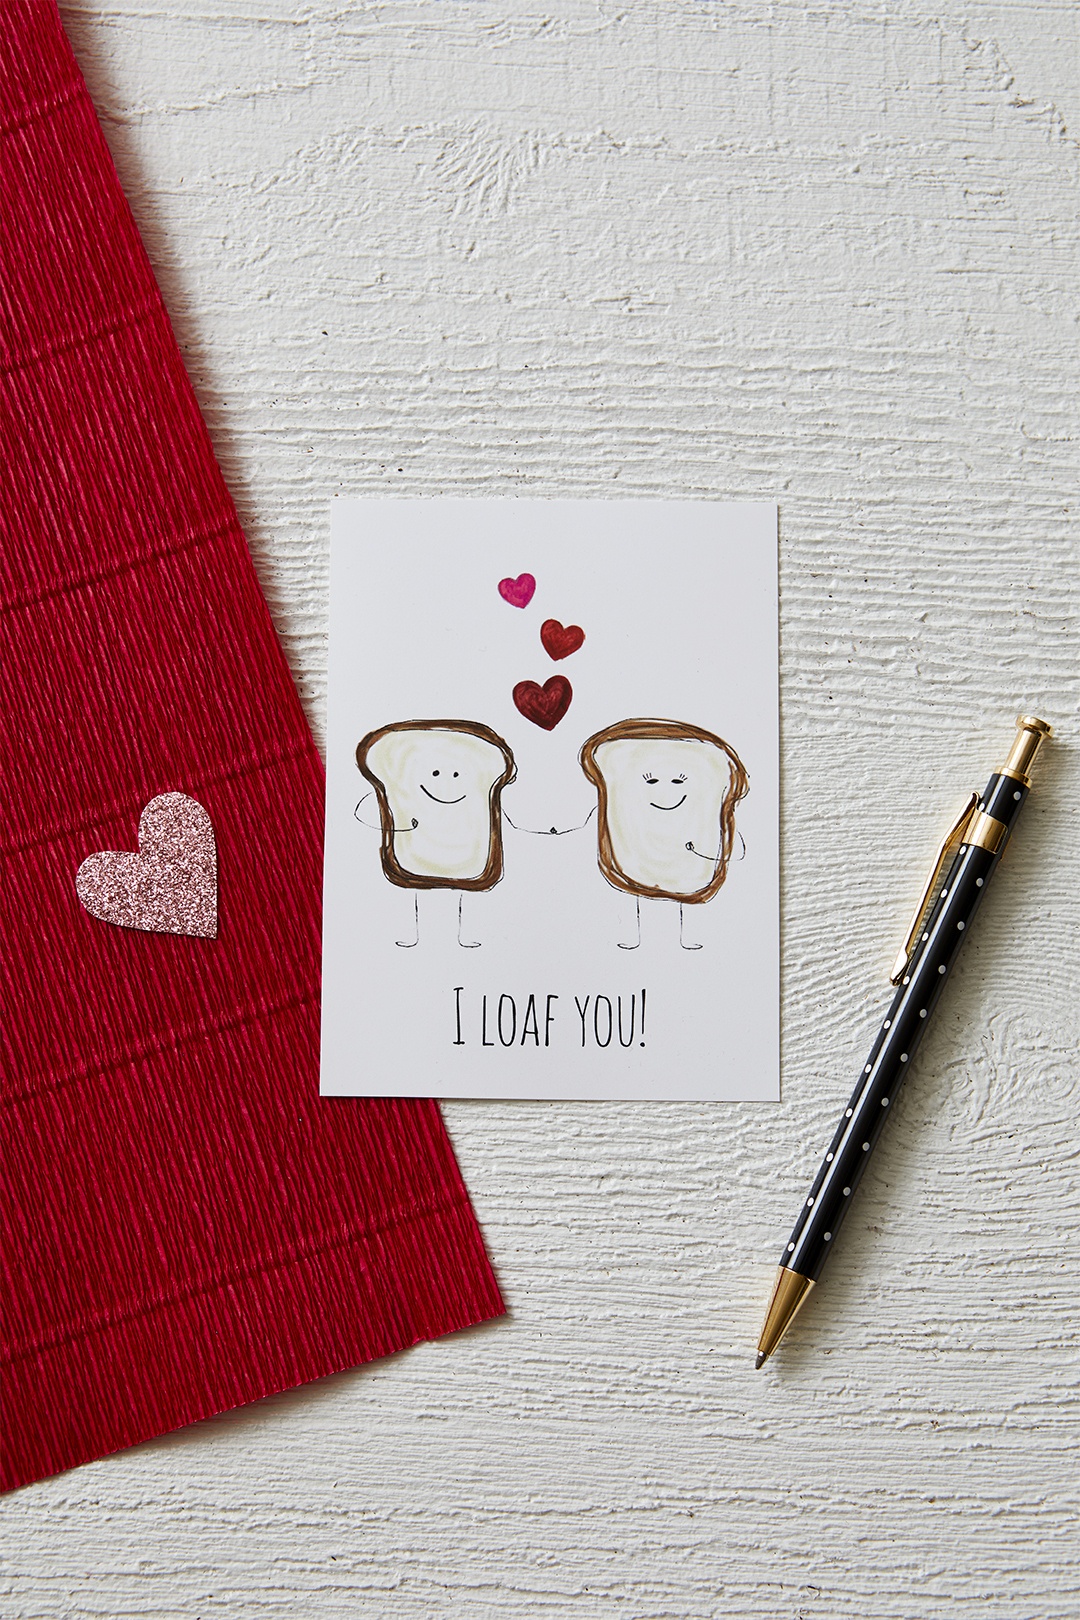 Free Printable Cards You Need For Valentine&amp;#039;s Day - Free Printable Valentines Day Cards For Her